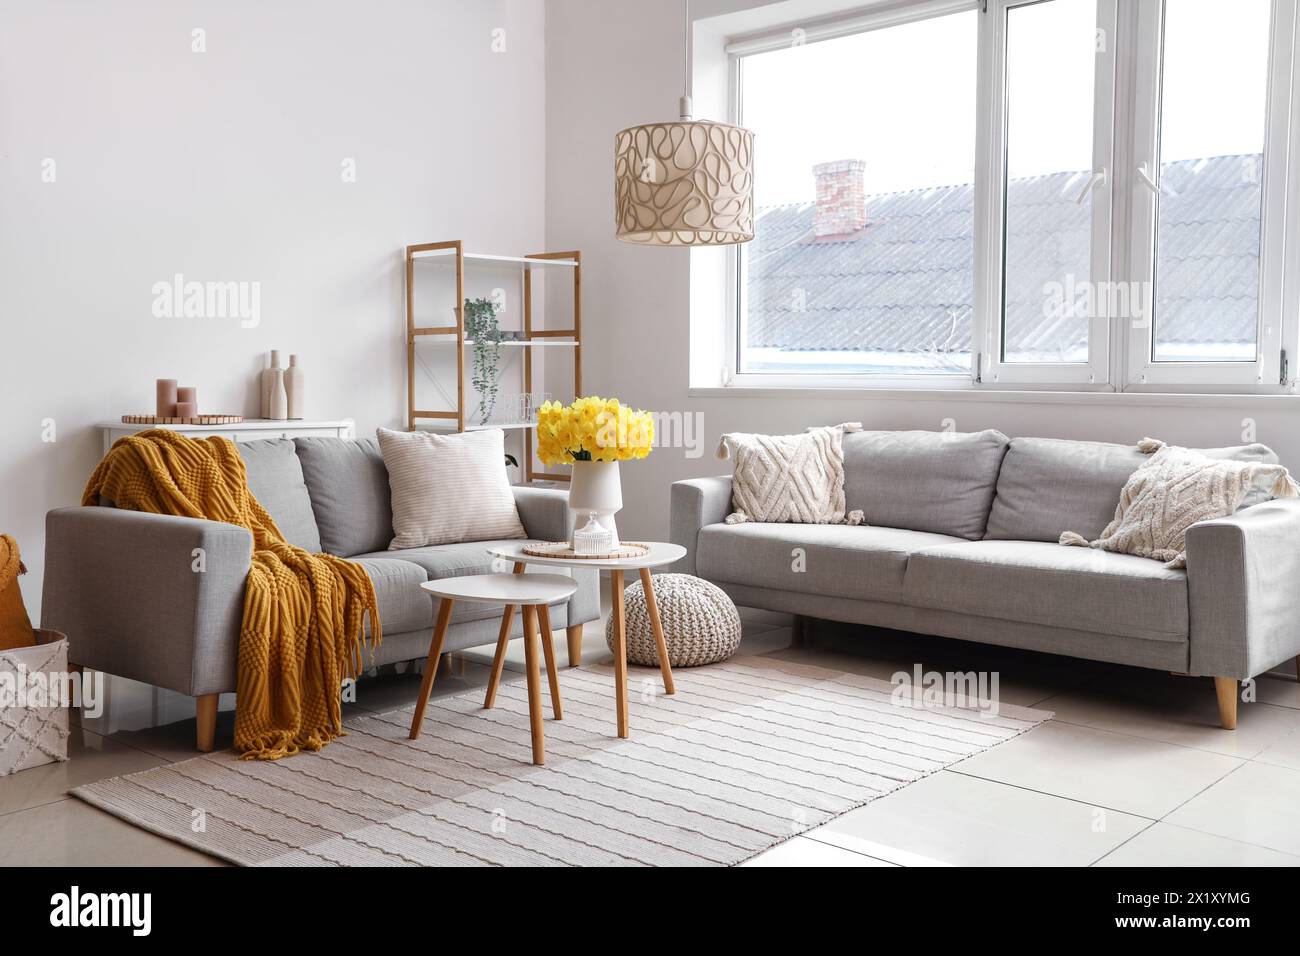 Interior of beautiful living room with sofas, bouquet of narcissus flowers and coffee table Stock Photo